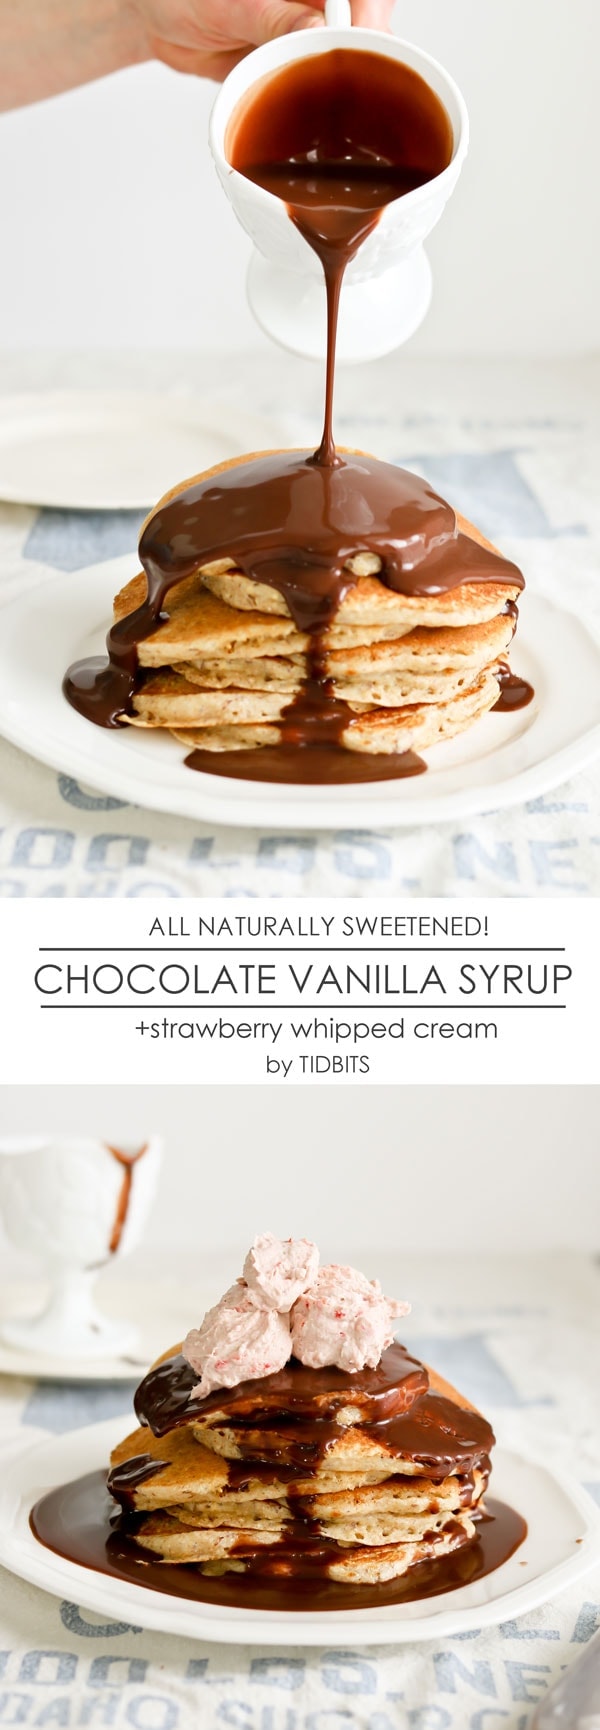 All naturally sweetened chocolate vanilla syrup + strawberry whipped cream. Guilt free goodness!